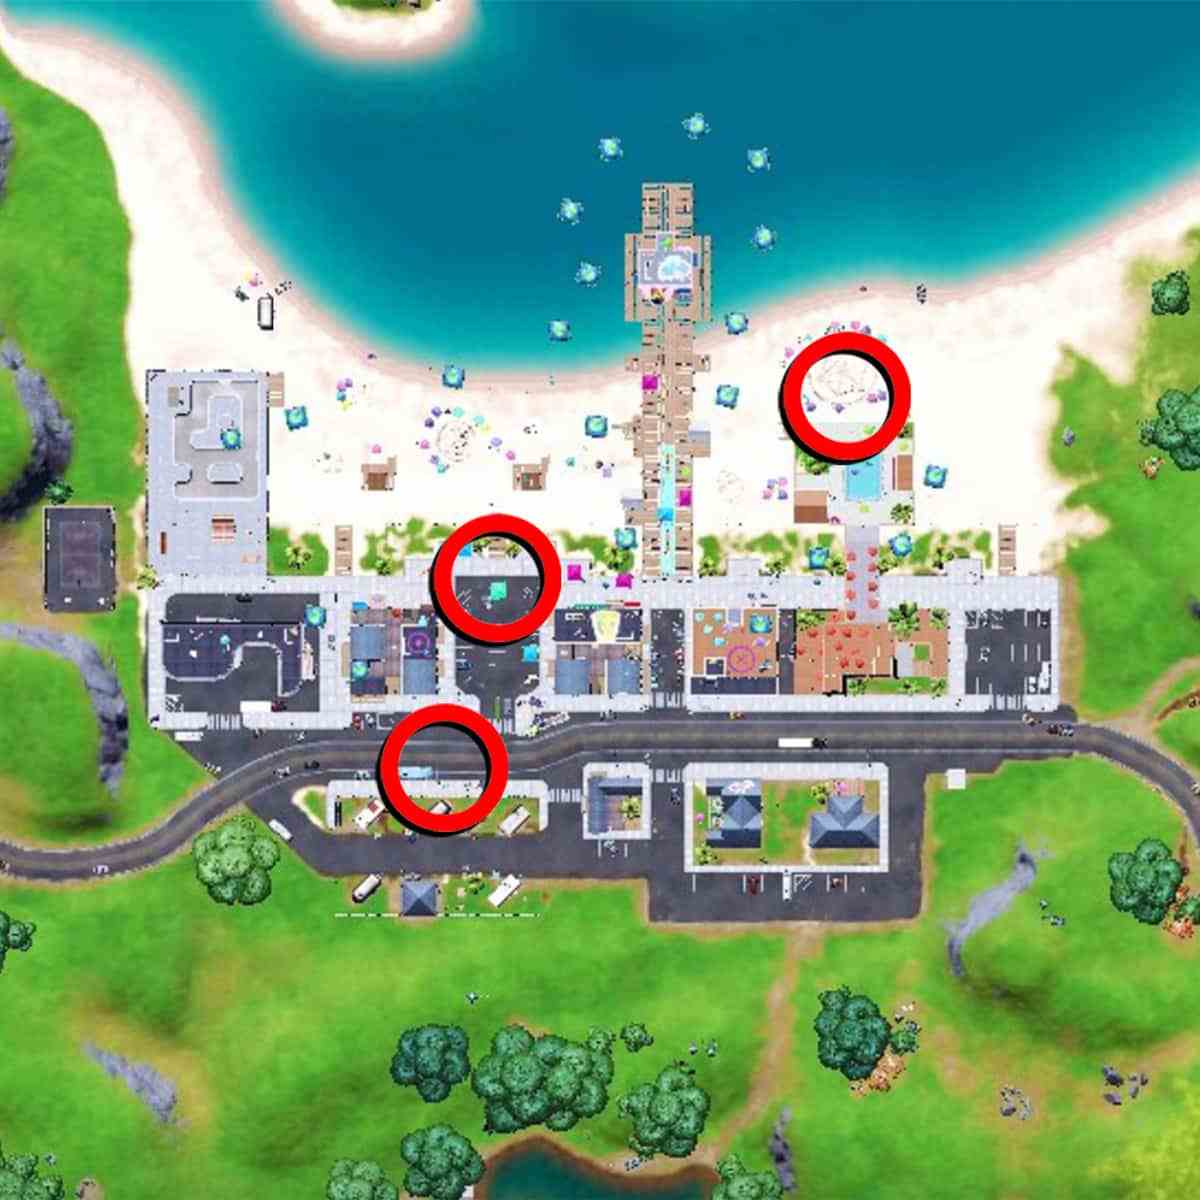 Boomboxes in Fortnite Where to find